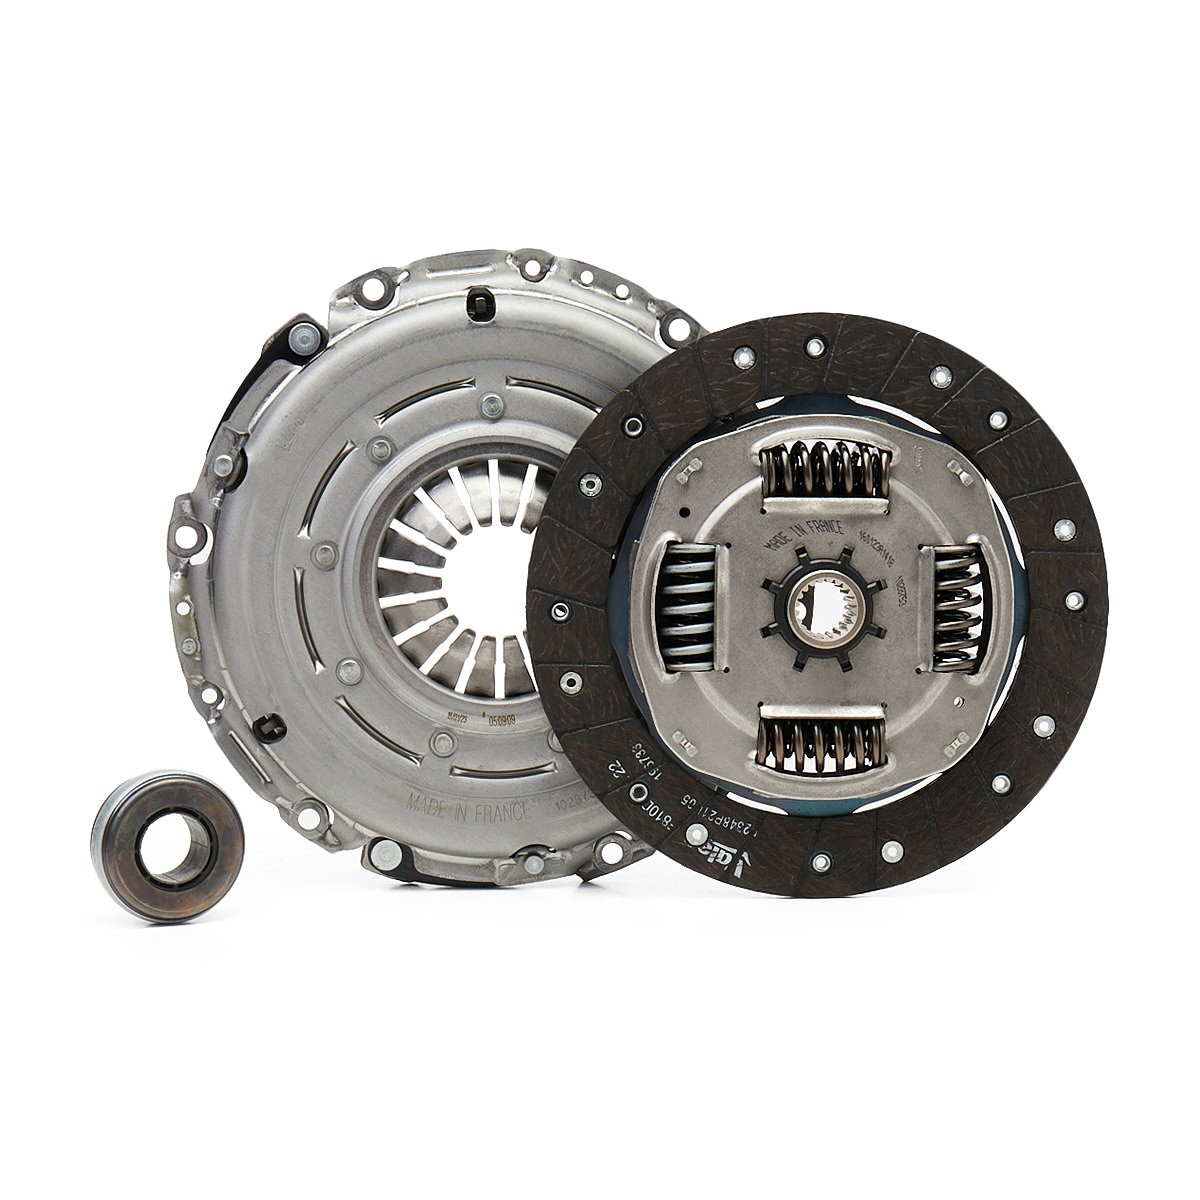 VALEO KIT3P 828454 Clutch kit with clutch pressure plate, Special tools for mounting not necessary, with clutch disc, with clutch release bearing